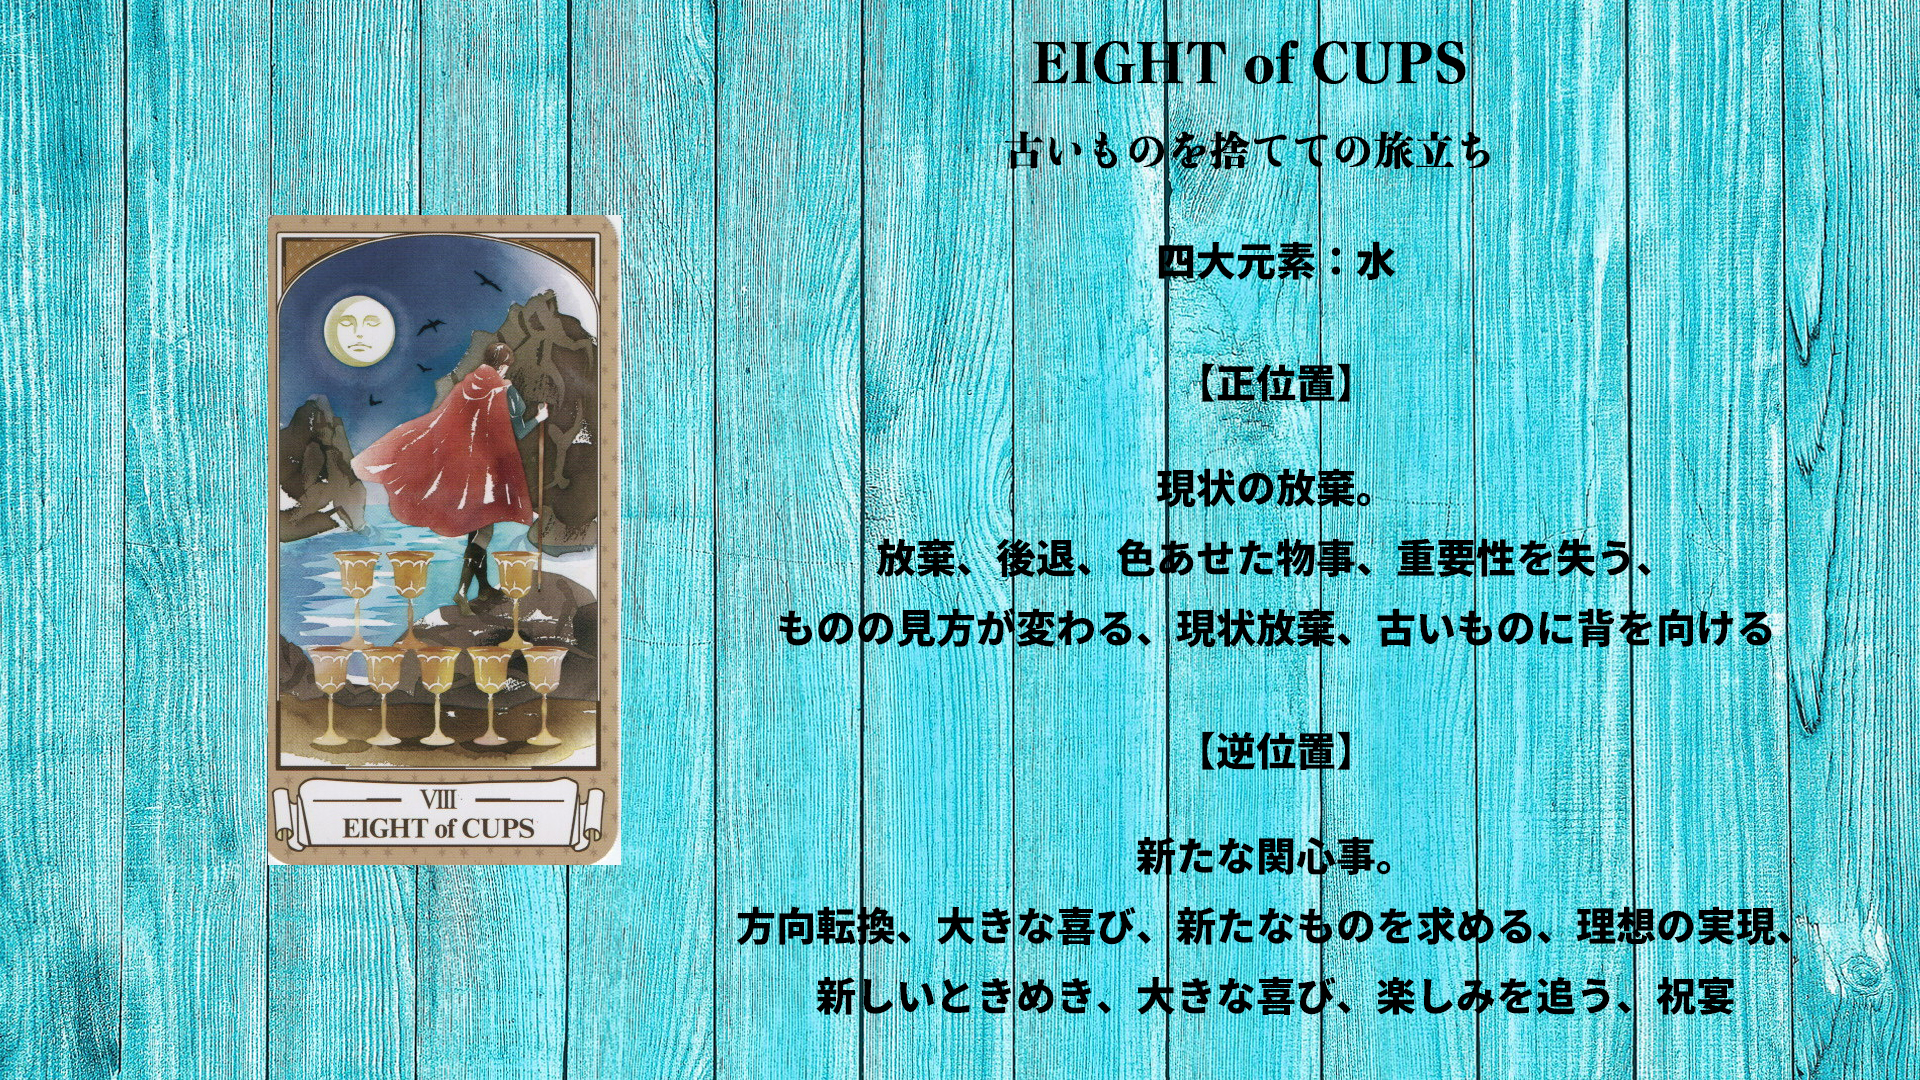 EIGHT of CUPS